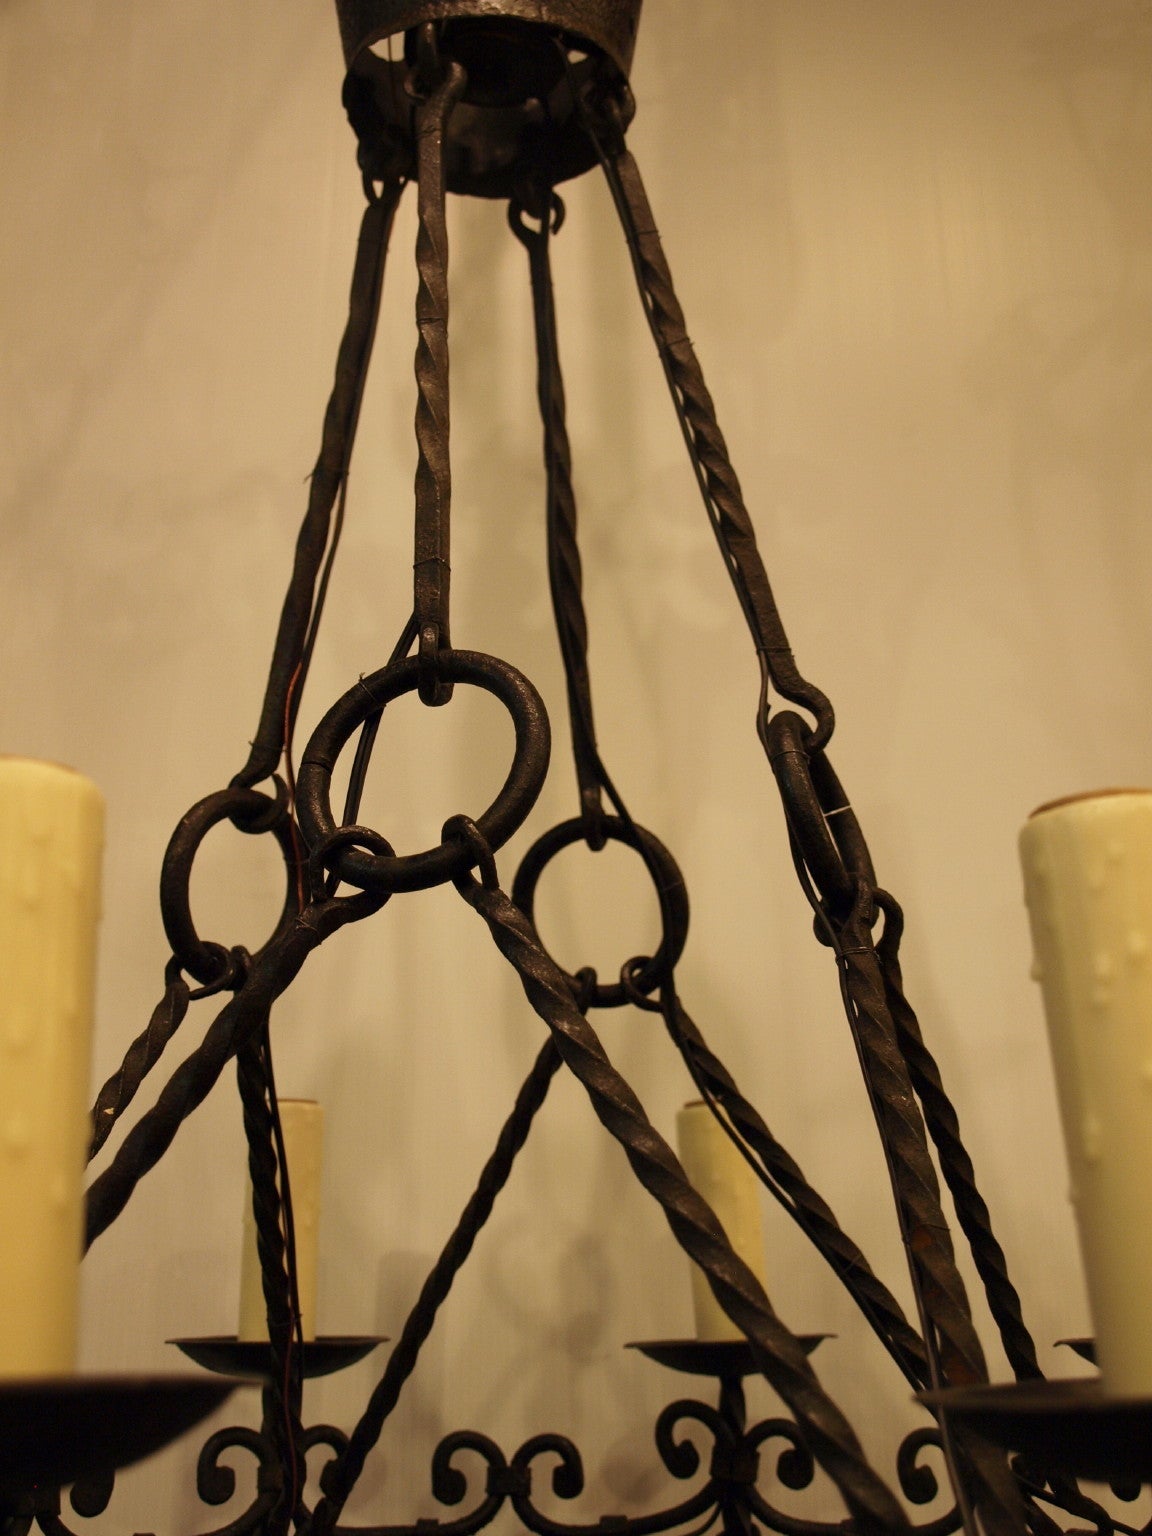 Originally for candles, this elegant eight-light 19th century French iron chandelier has been electrified.